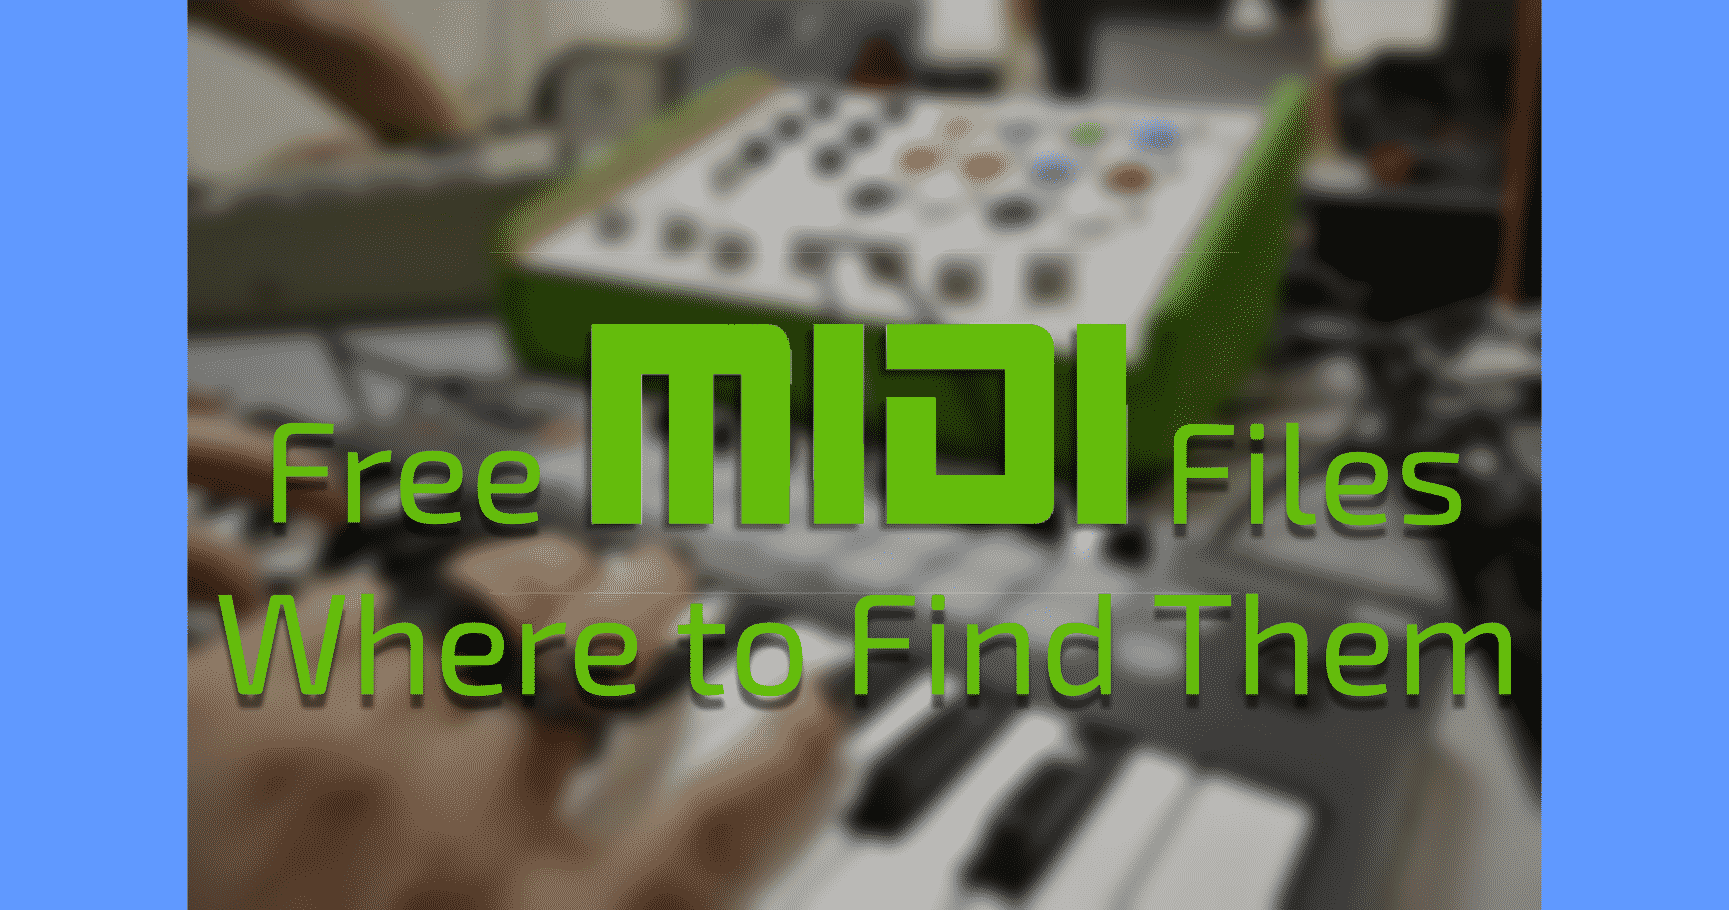 Free Midi Files Where To Find Them Beat Lab - cute slow songs roblox piano sheet robux gratis asli